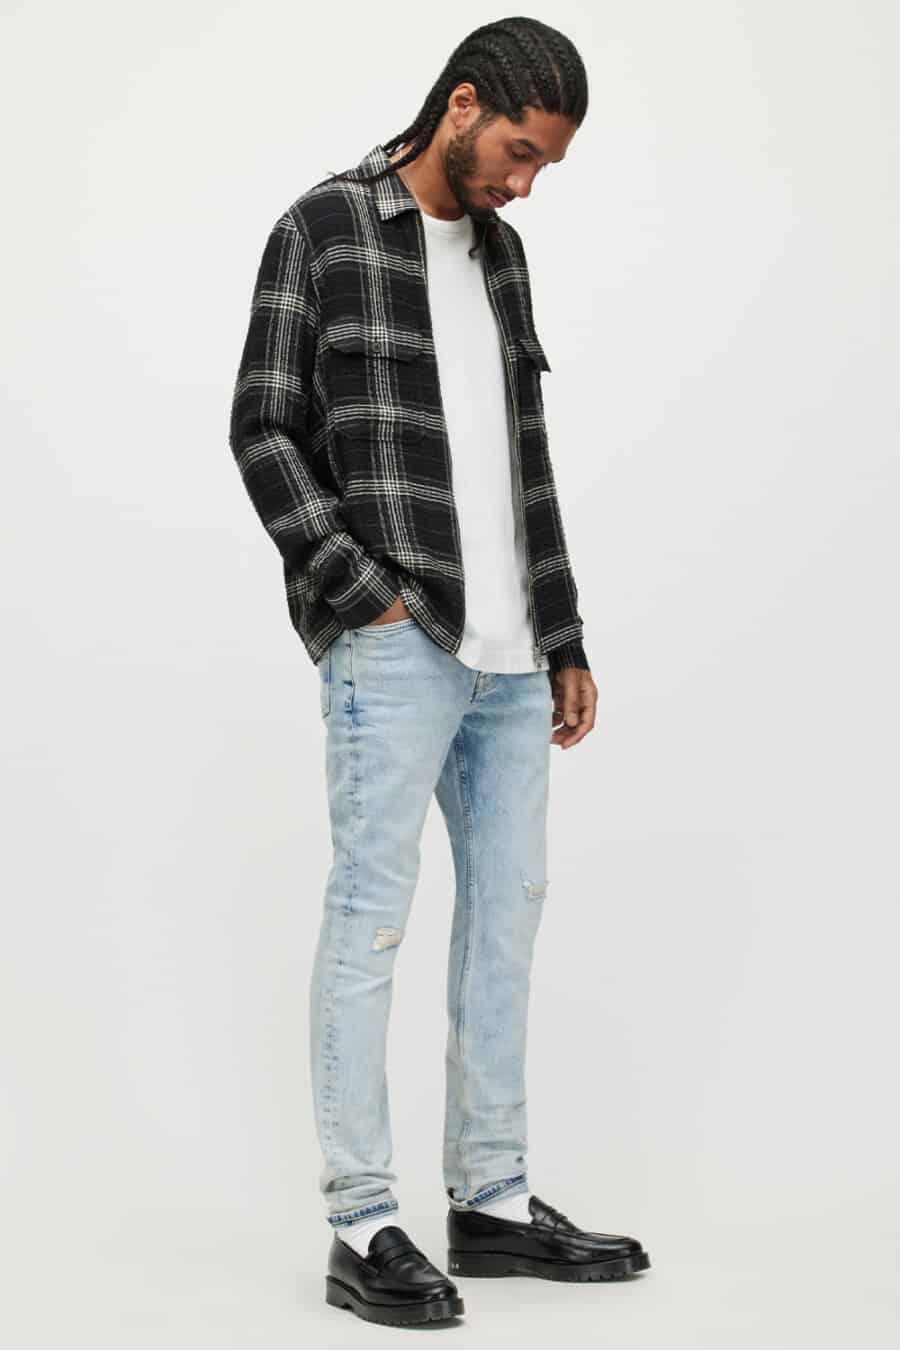 Men's light wash acid jeans, white T-shirt, checked flannel shirt and chunky black penny loafers with white socks outfit